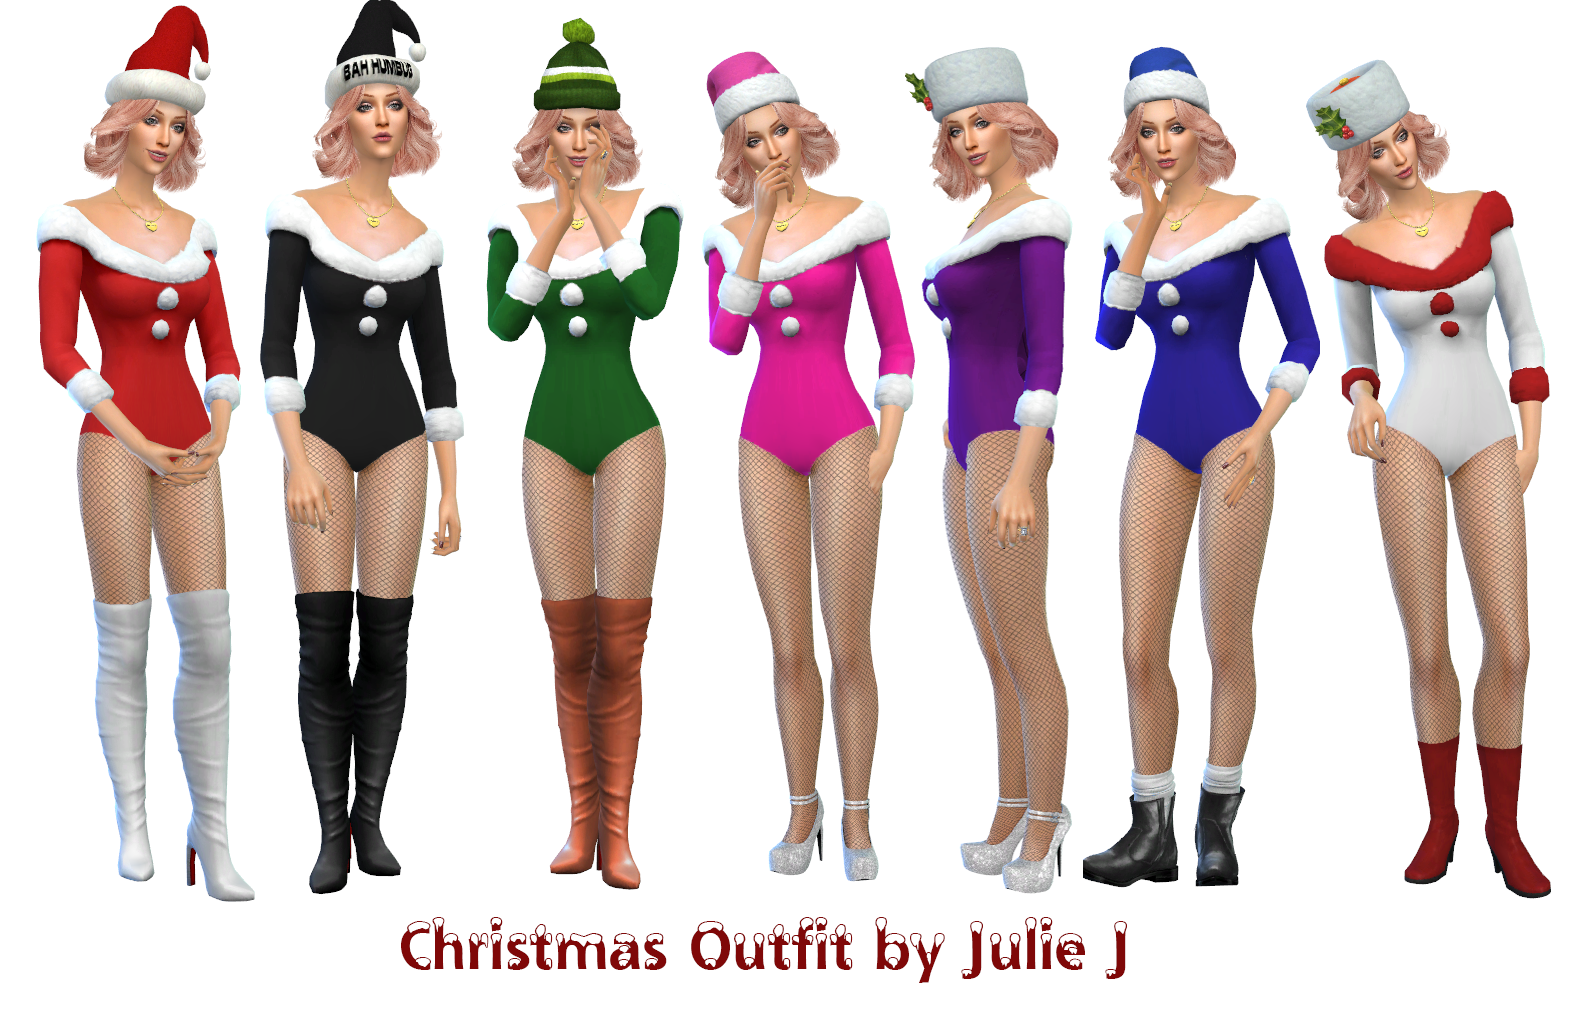 ChristmasOutfit.png.5b3f72c17933e3d5d447813563dddef0.png